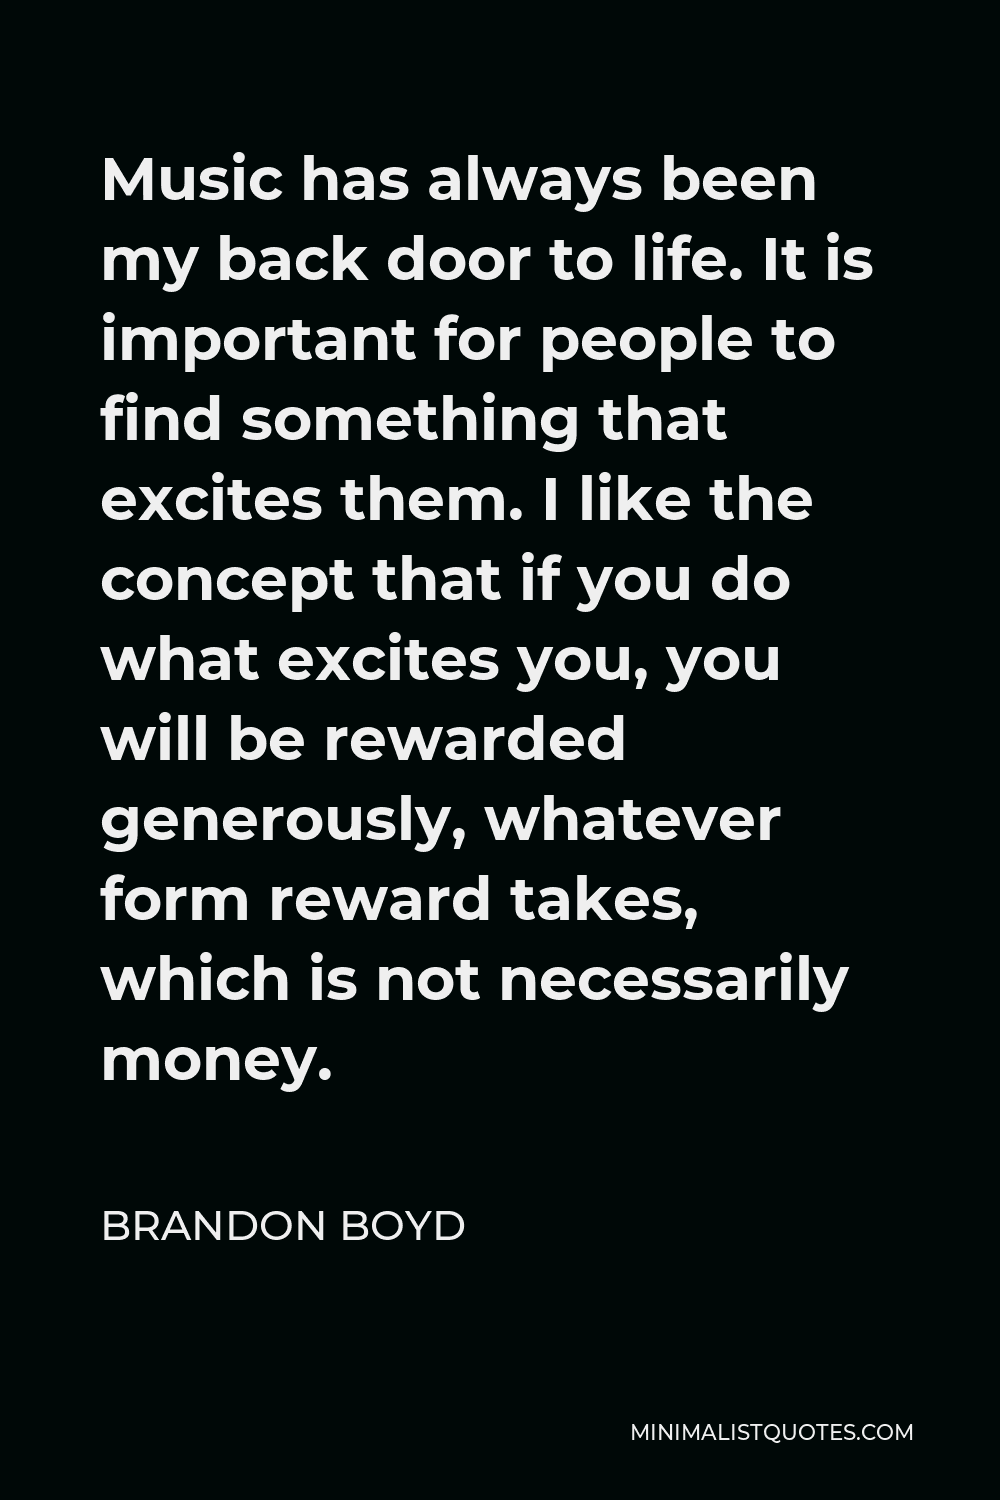 Brandon Boyd Quote - Music has always been my back door to life. It is important for people to find something that excites them. I like the concept that if you do what excites you, you will be rewarded generously, whatever form reward takes, which is not necessarily money.